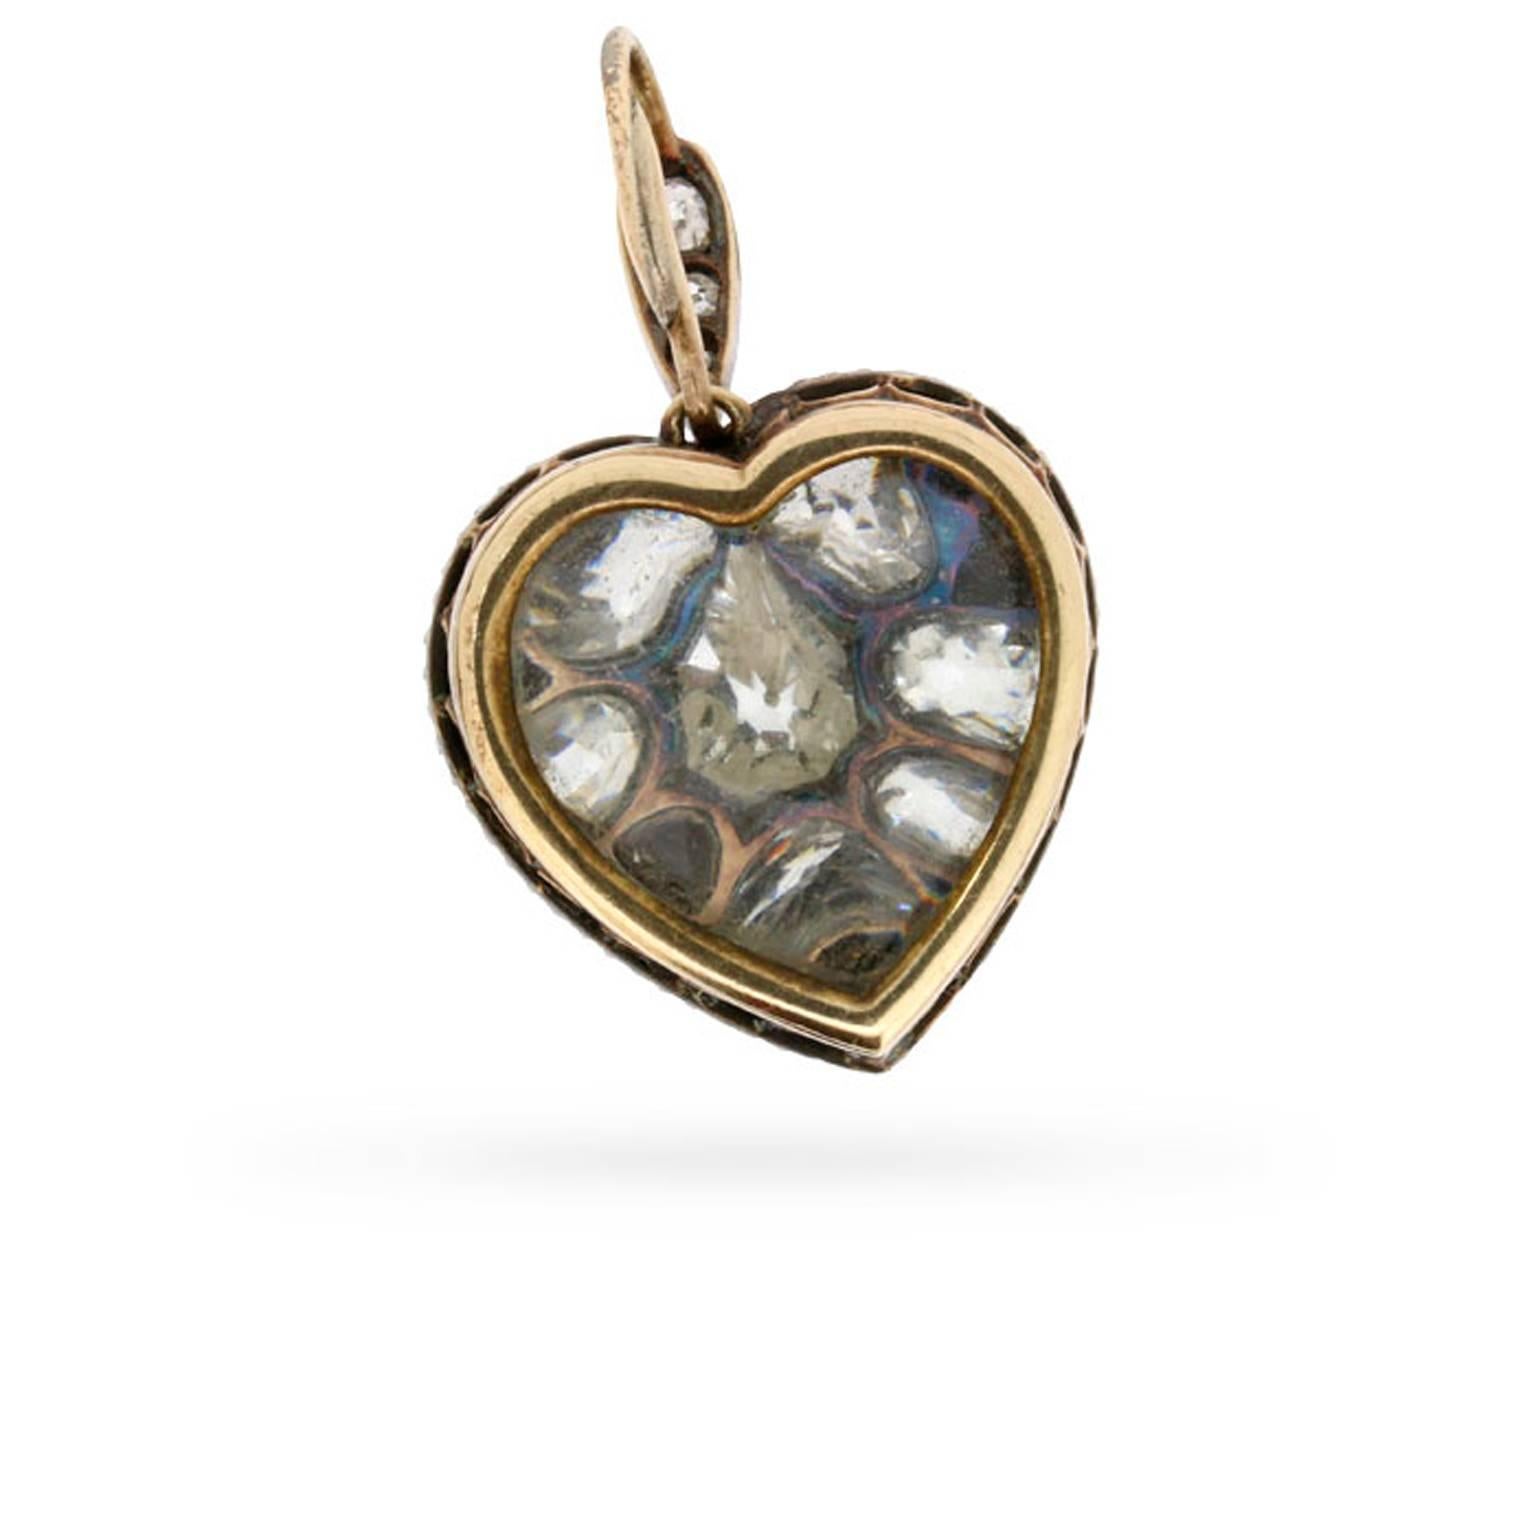 This rare and romantic heart-shaped locket was handmade in 18 carat yellow gold and silver over 125 years ago!

The circa 1880s locket is grain set with 3.60 carats of old cushion cut diamonds in graduated sizes with a lovely undulating gold border